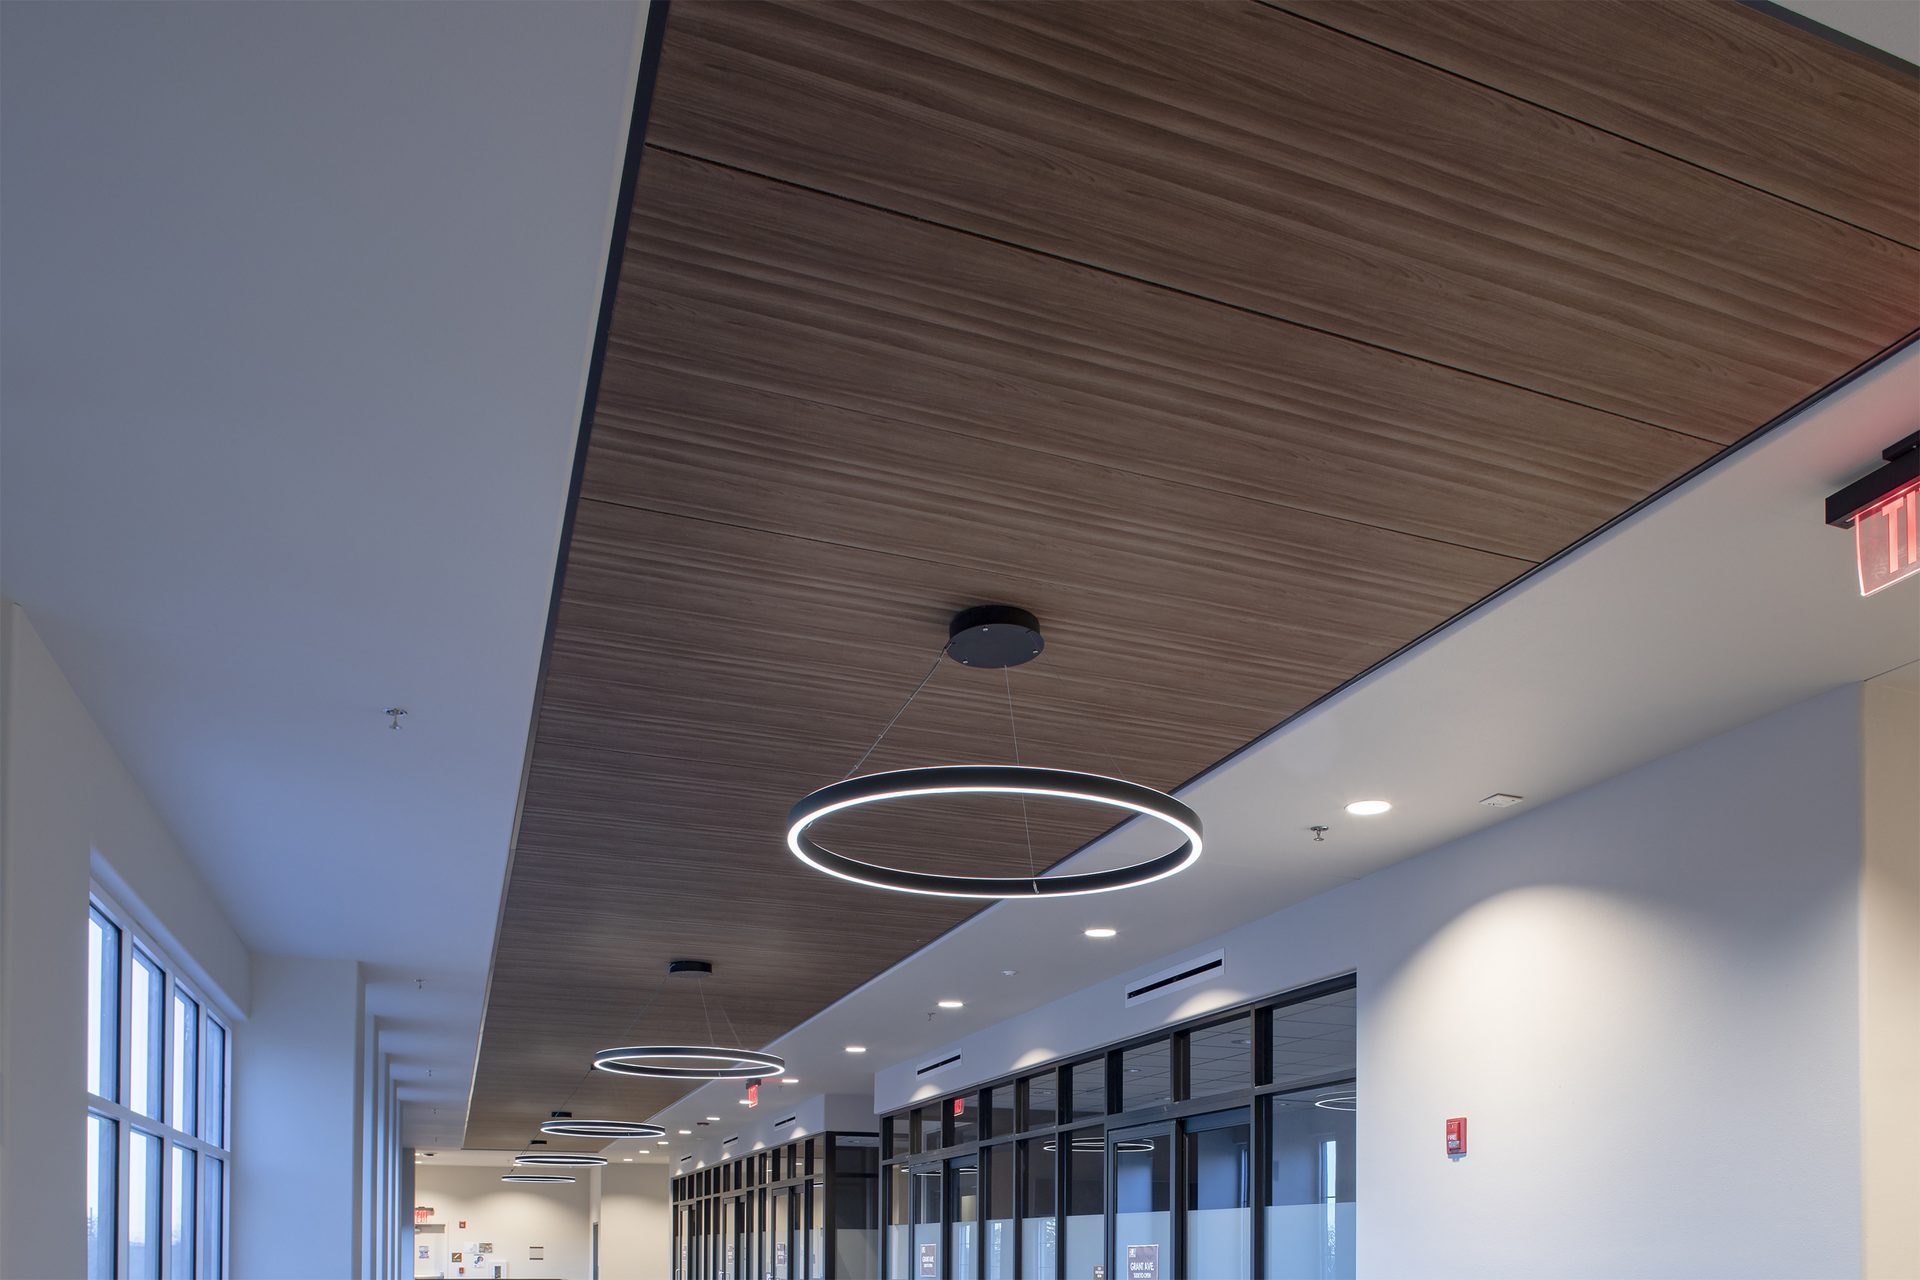 View of dark wood finish ceiling with row of ring-shaped lighting fixtures.